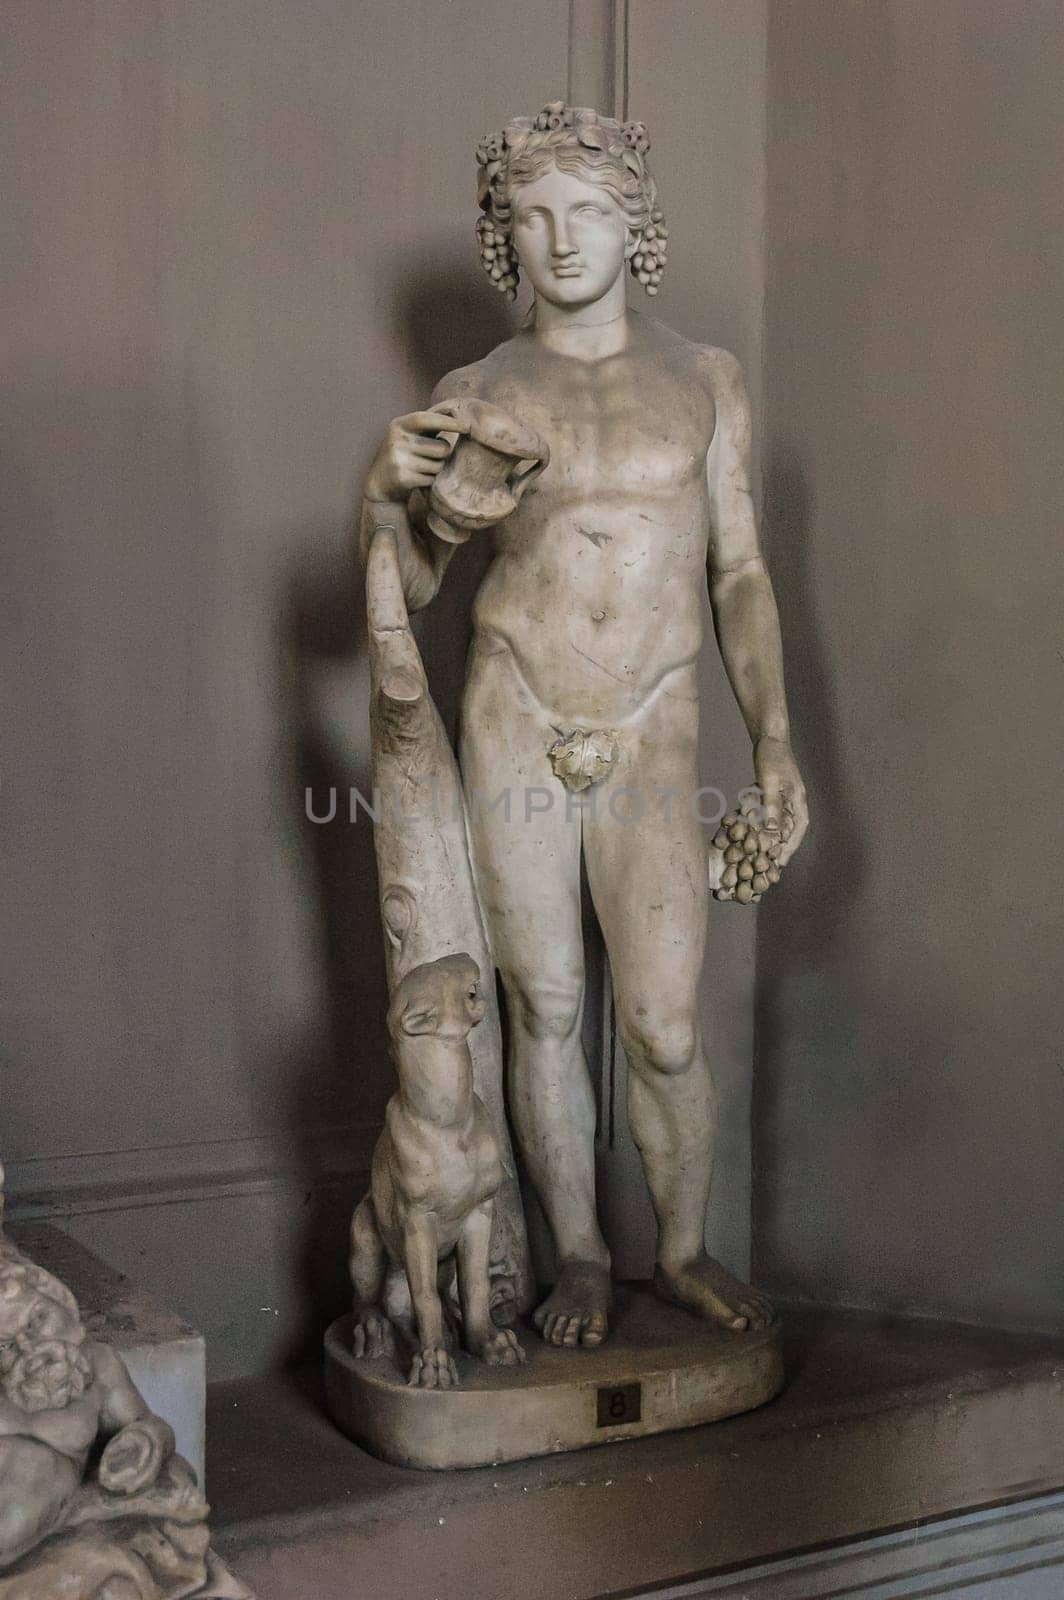 Vatican City, August 21, 2008: Statue of the God Bacchus. Pio Clementino Museum, St. Peter's Basilica